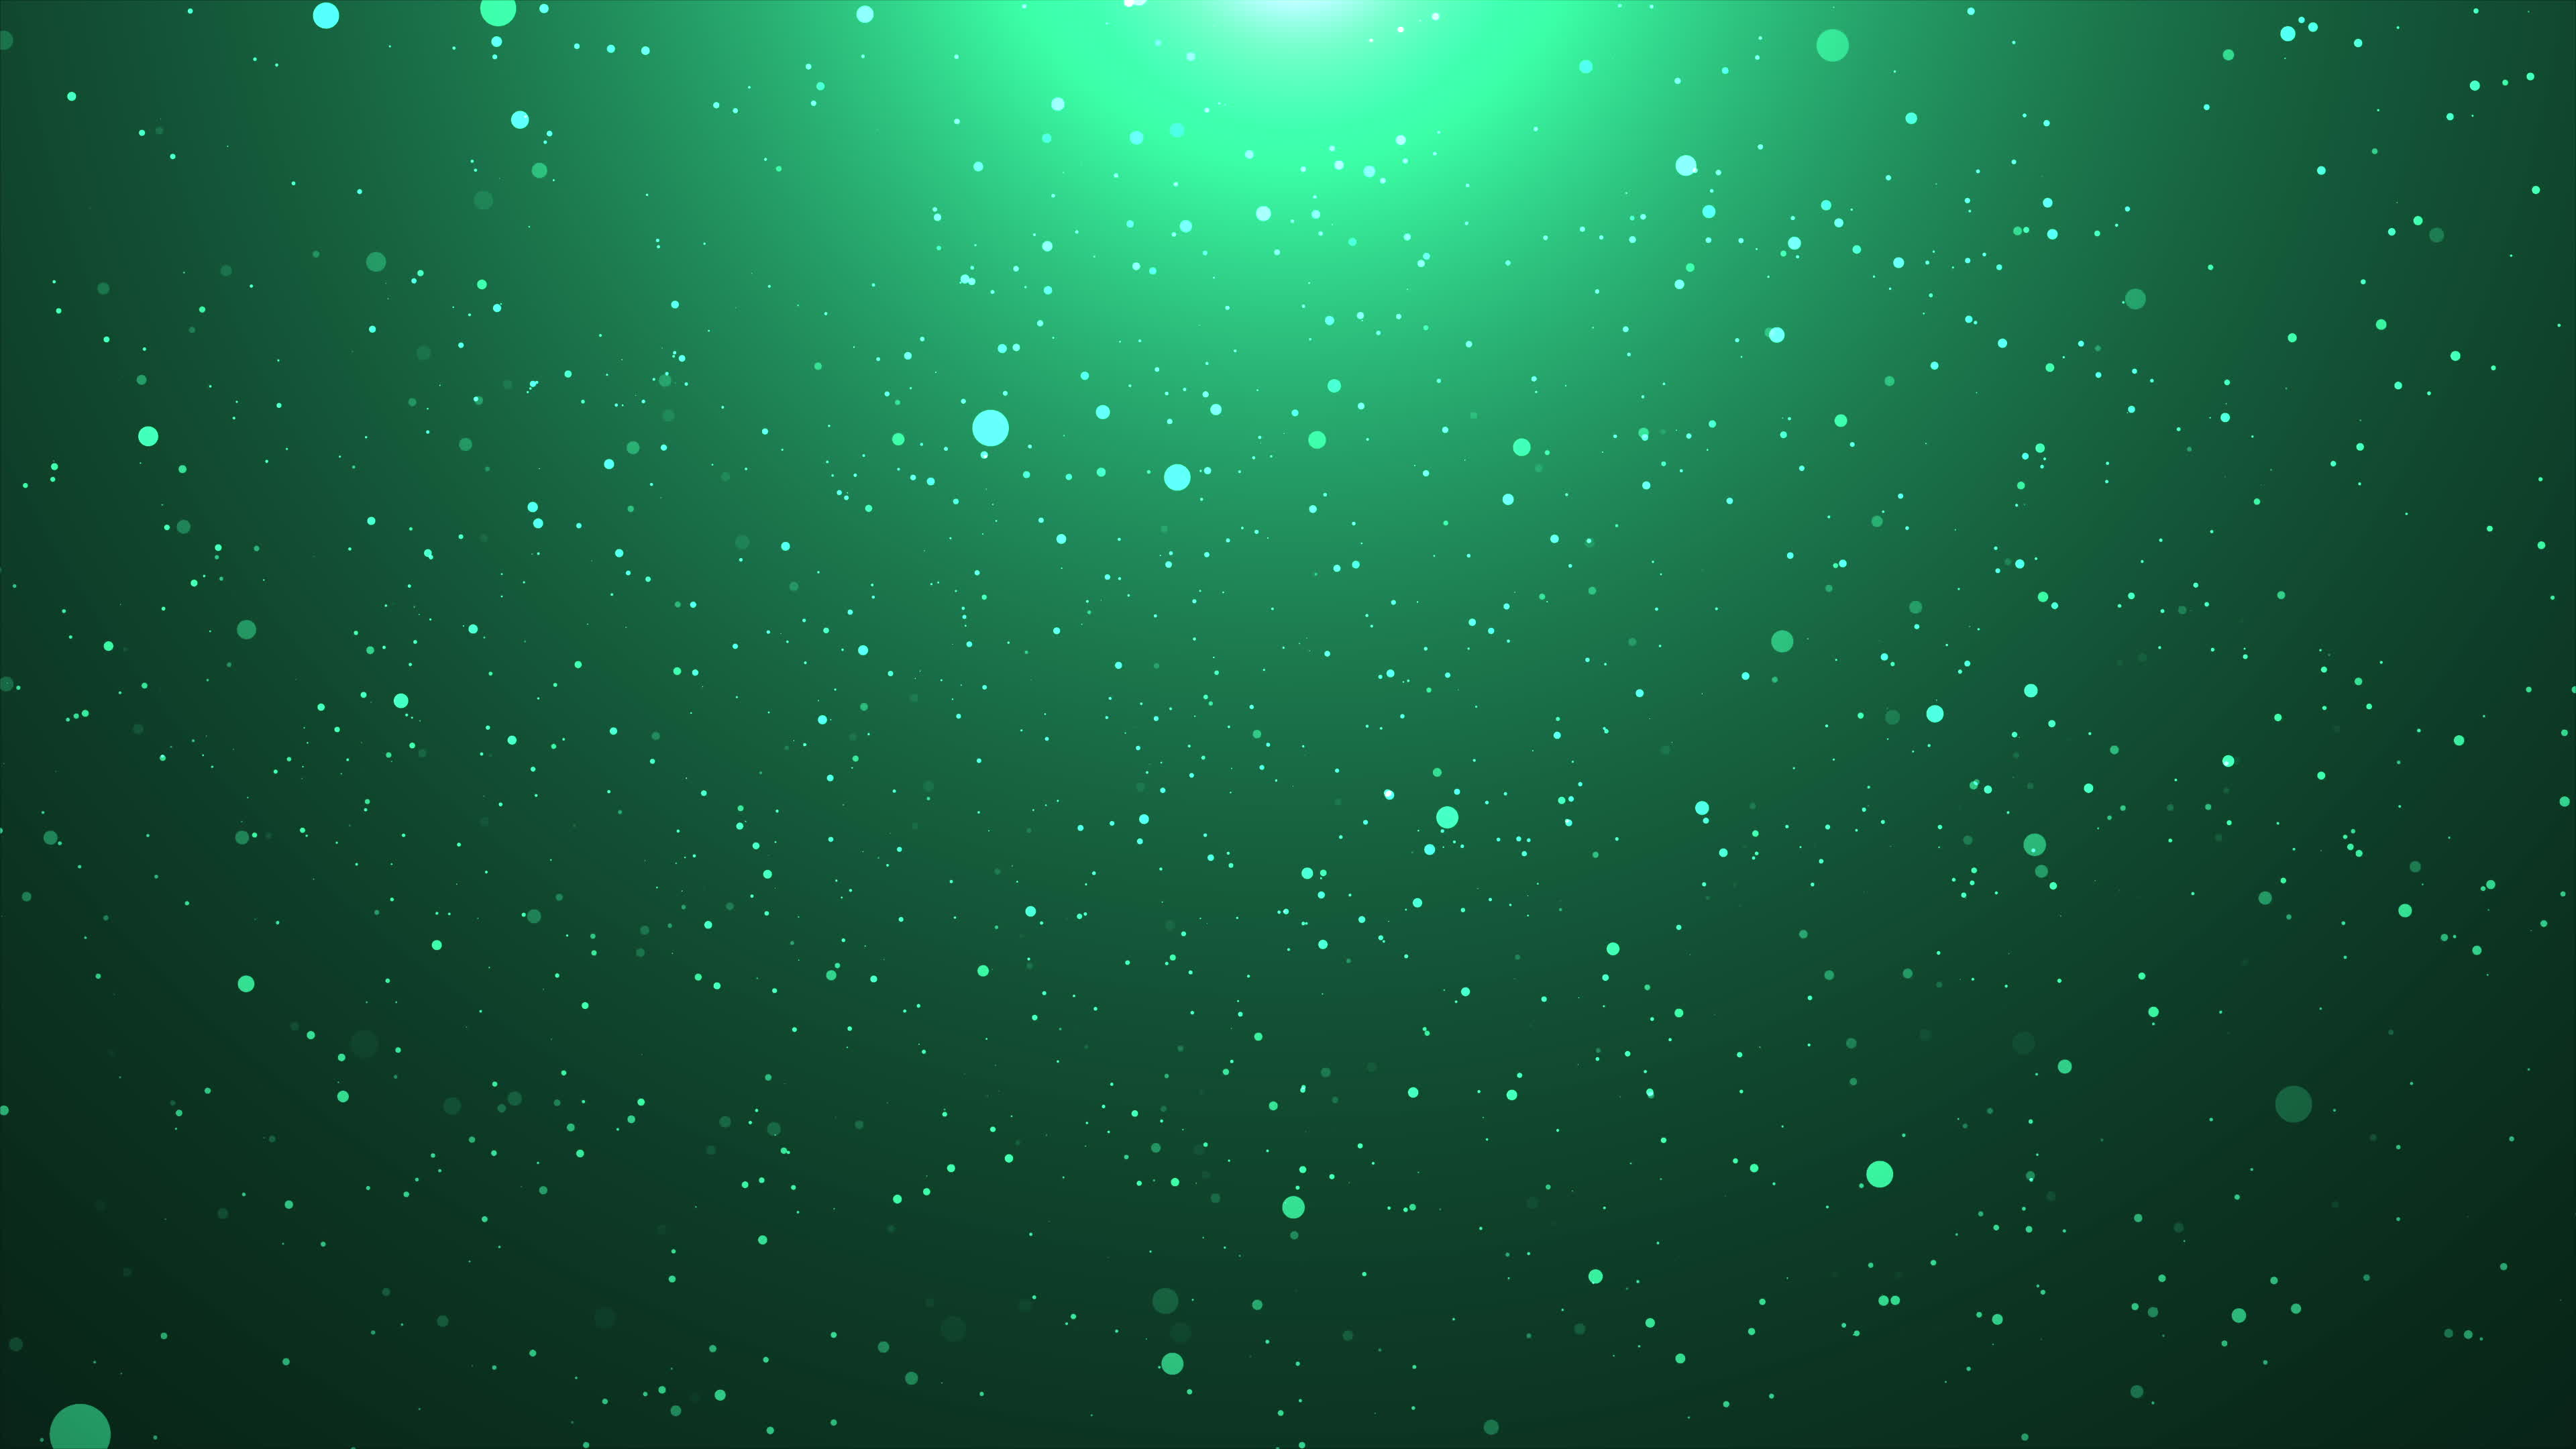 https://static.vecteezy.com/system/resources/thumbnails/003/003/783/original/green-particle-flare-background-for-background-concept-free-video.jpg